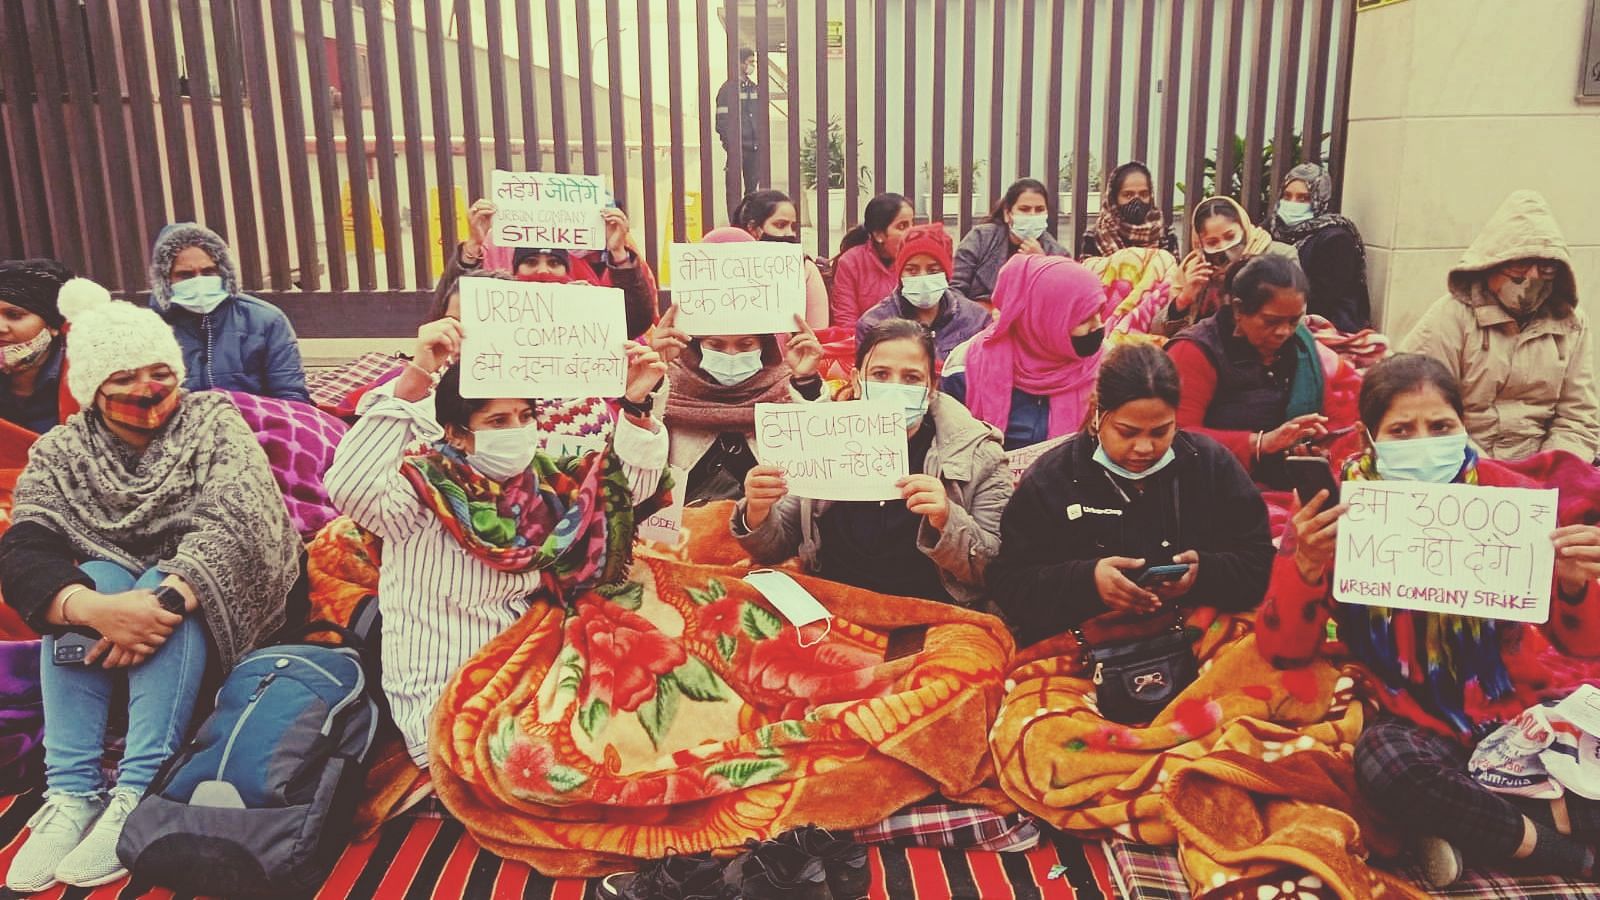 <div class="paragraphs"><p>Urban Company's gig workers protesting the company's newly introduced policy changes, which they claim will adversely effect their earnings and working hours.</p></div>